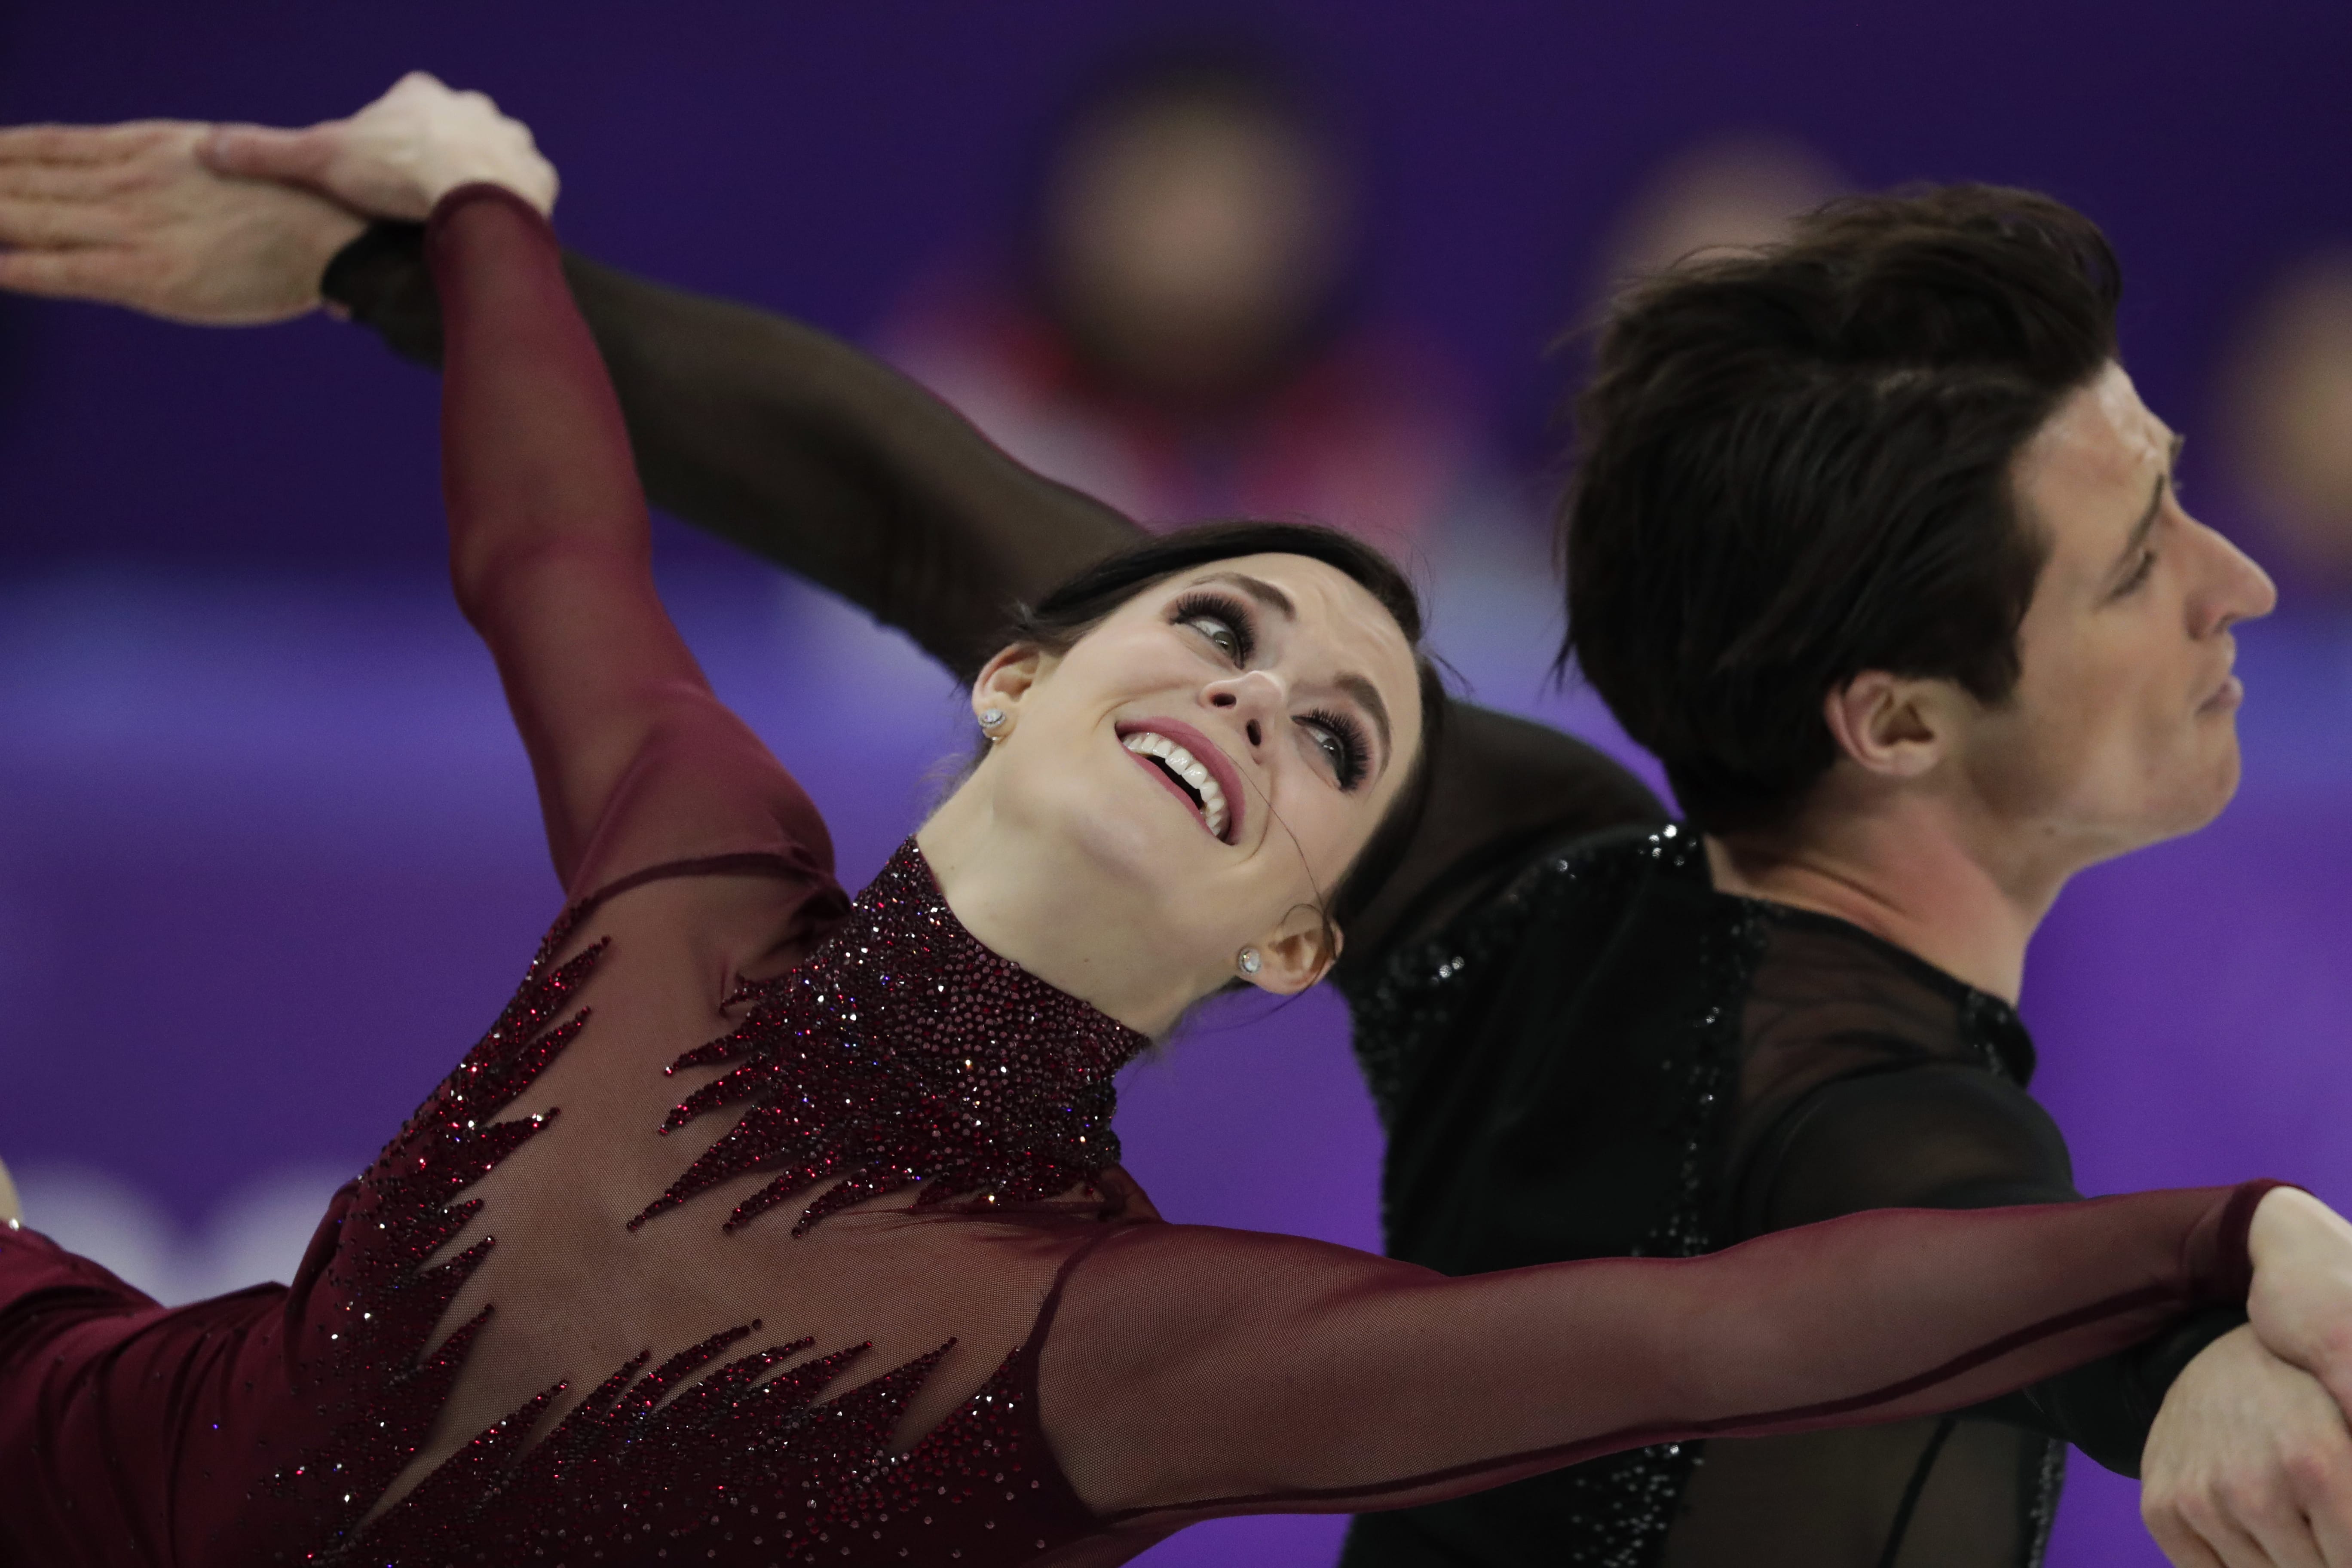 Tessa Virtue and Scott Moir of Canada perform during the ice dance, free dance figure skating final in the Gangneung Ice Arena at the 2018 Winter Olympics in Gangneung, South Korea, Tuesday, Feb. 20, 2018.